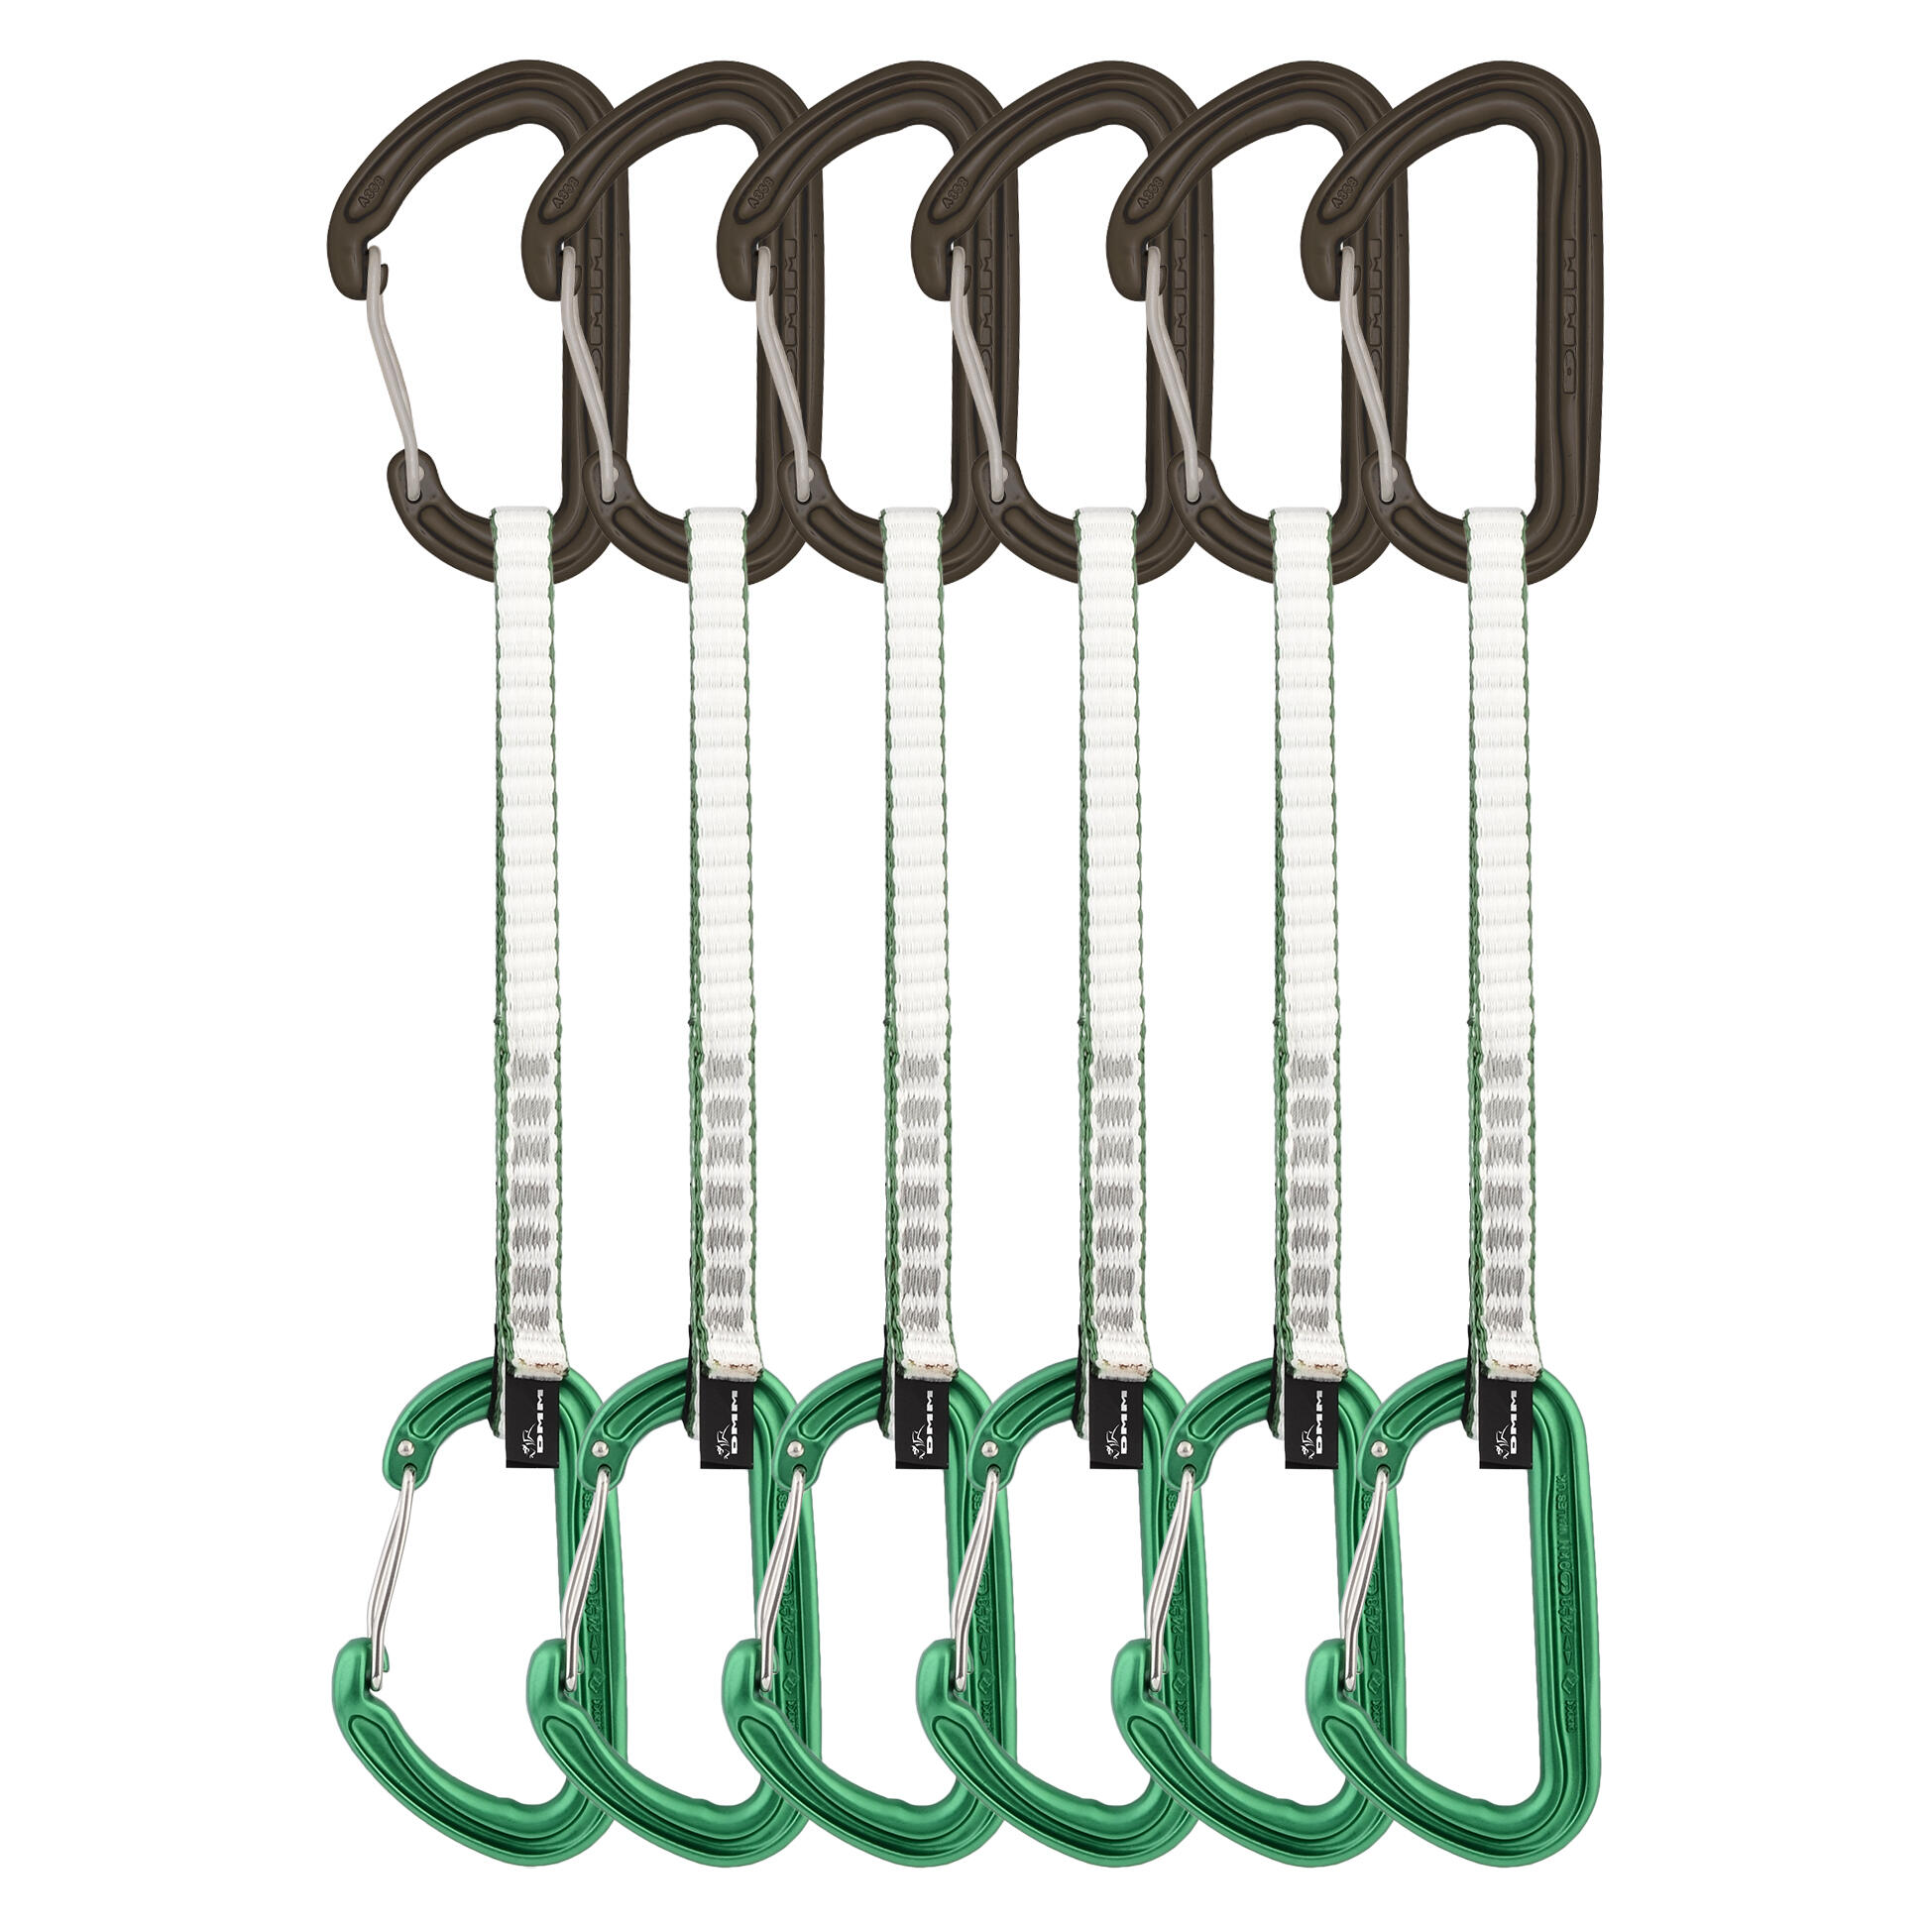 DMM Spectre Quickdraw 18cm - Green - 6 Pack